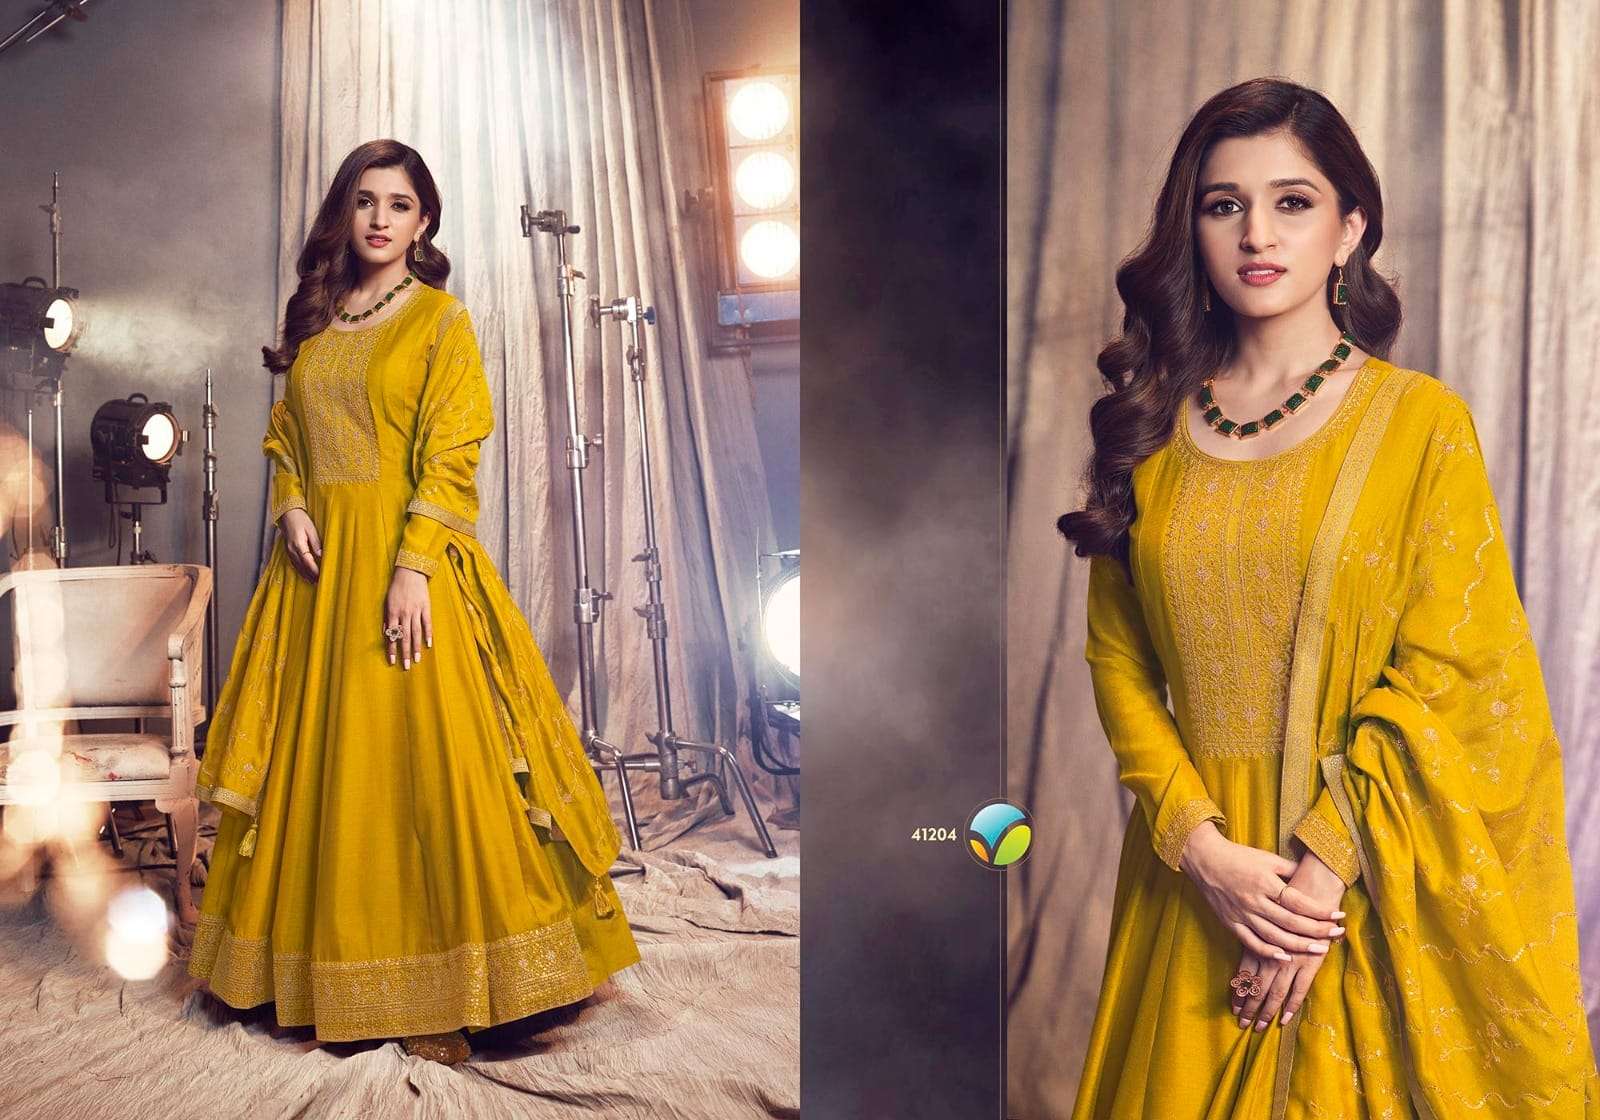 vinay fashion apsara 41201-41206 series readymade designer party wear gown with dupatta latest catalogue surat 